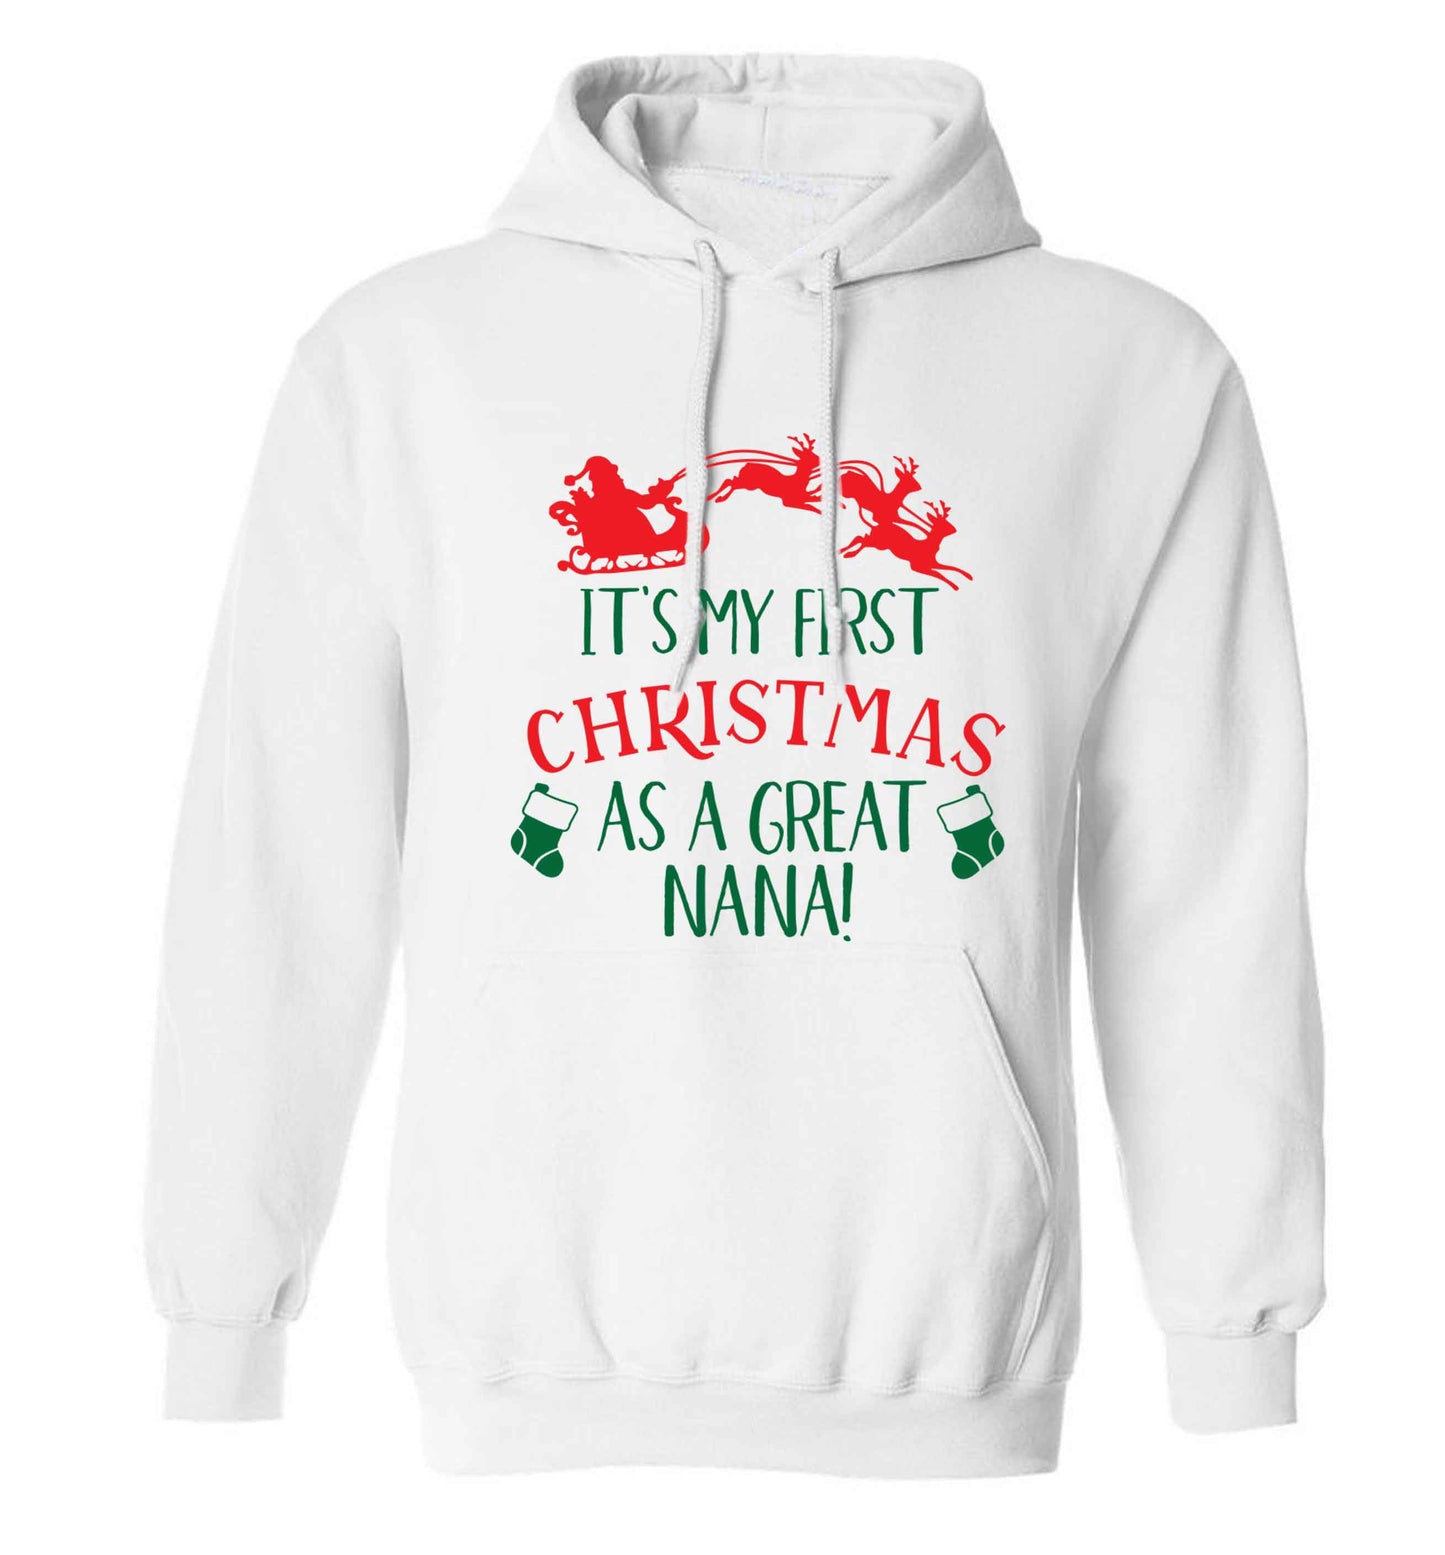 It's my first Christmas as a great nana! adults unisex white hoodie 2XL